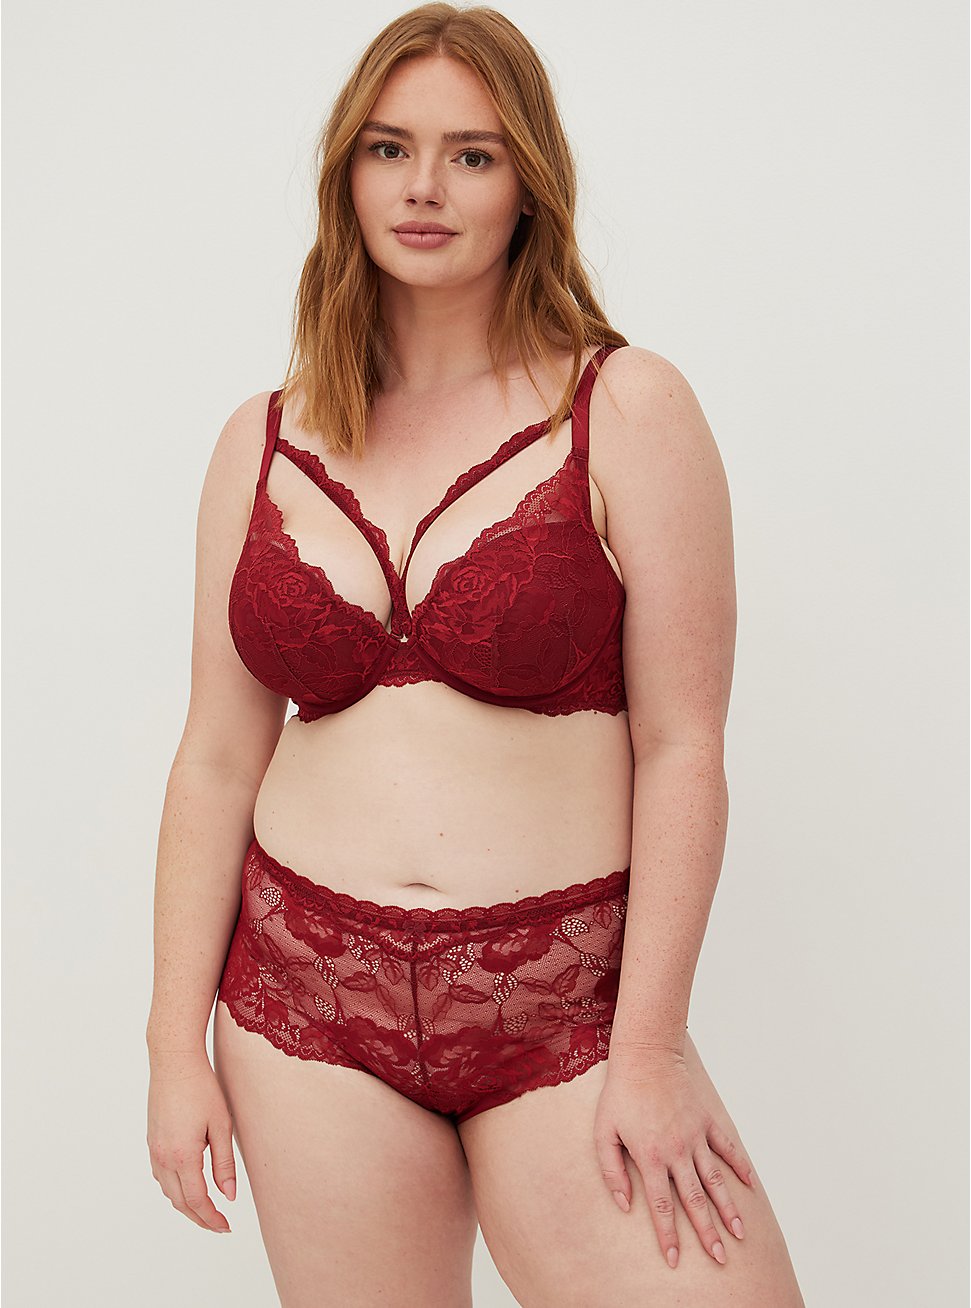 Plus Size Open Slit Back Cheeky Panty - Lace Red, BIKING RED, hi-res